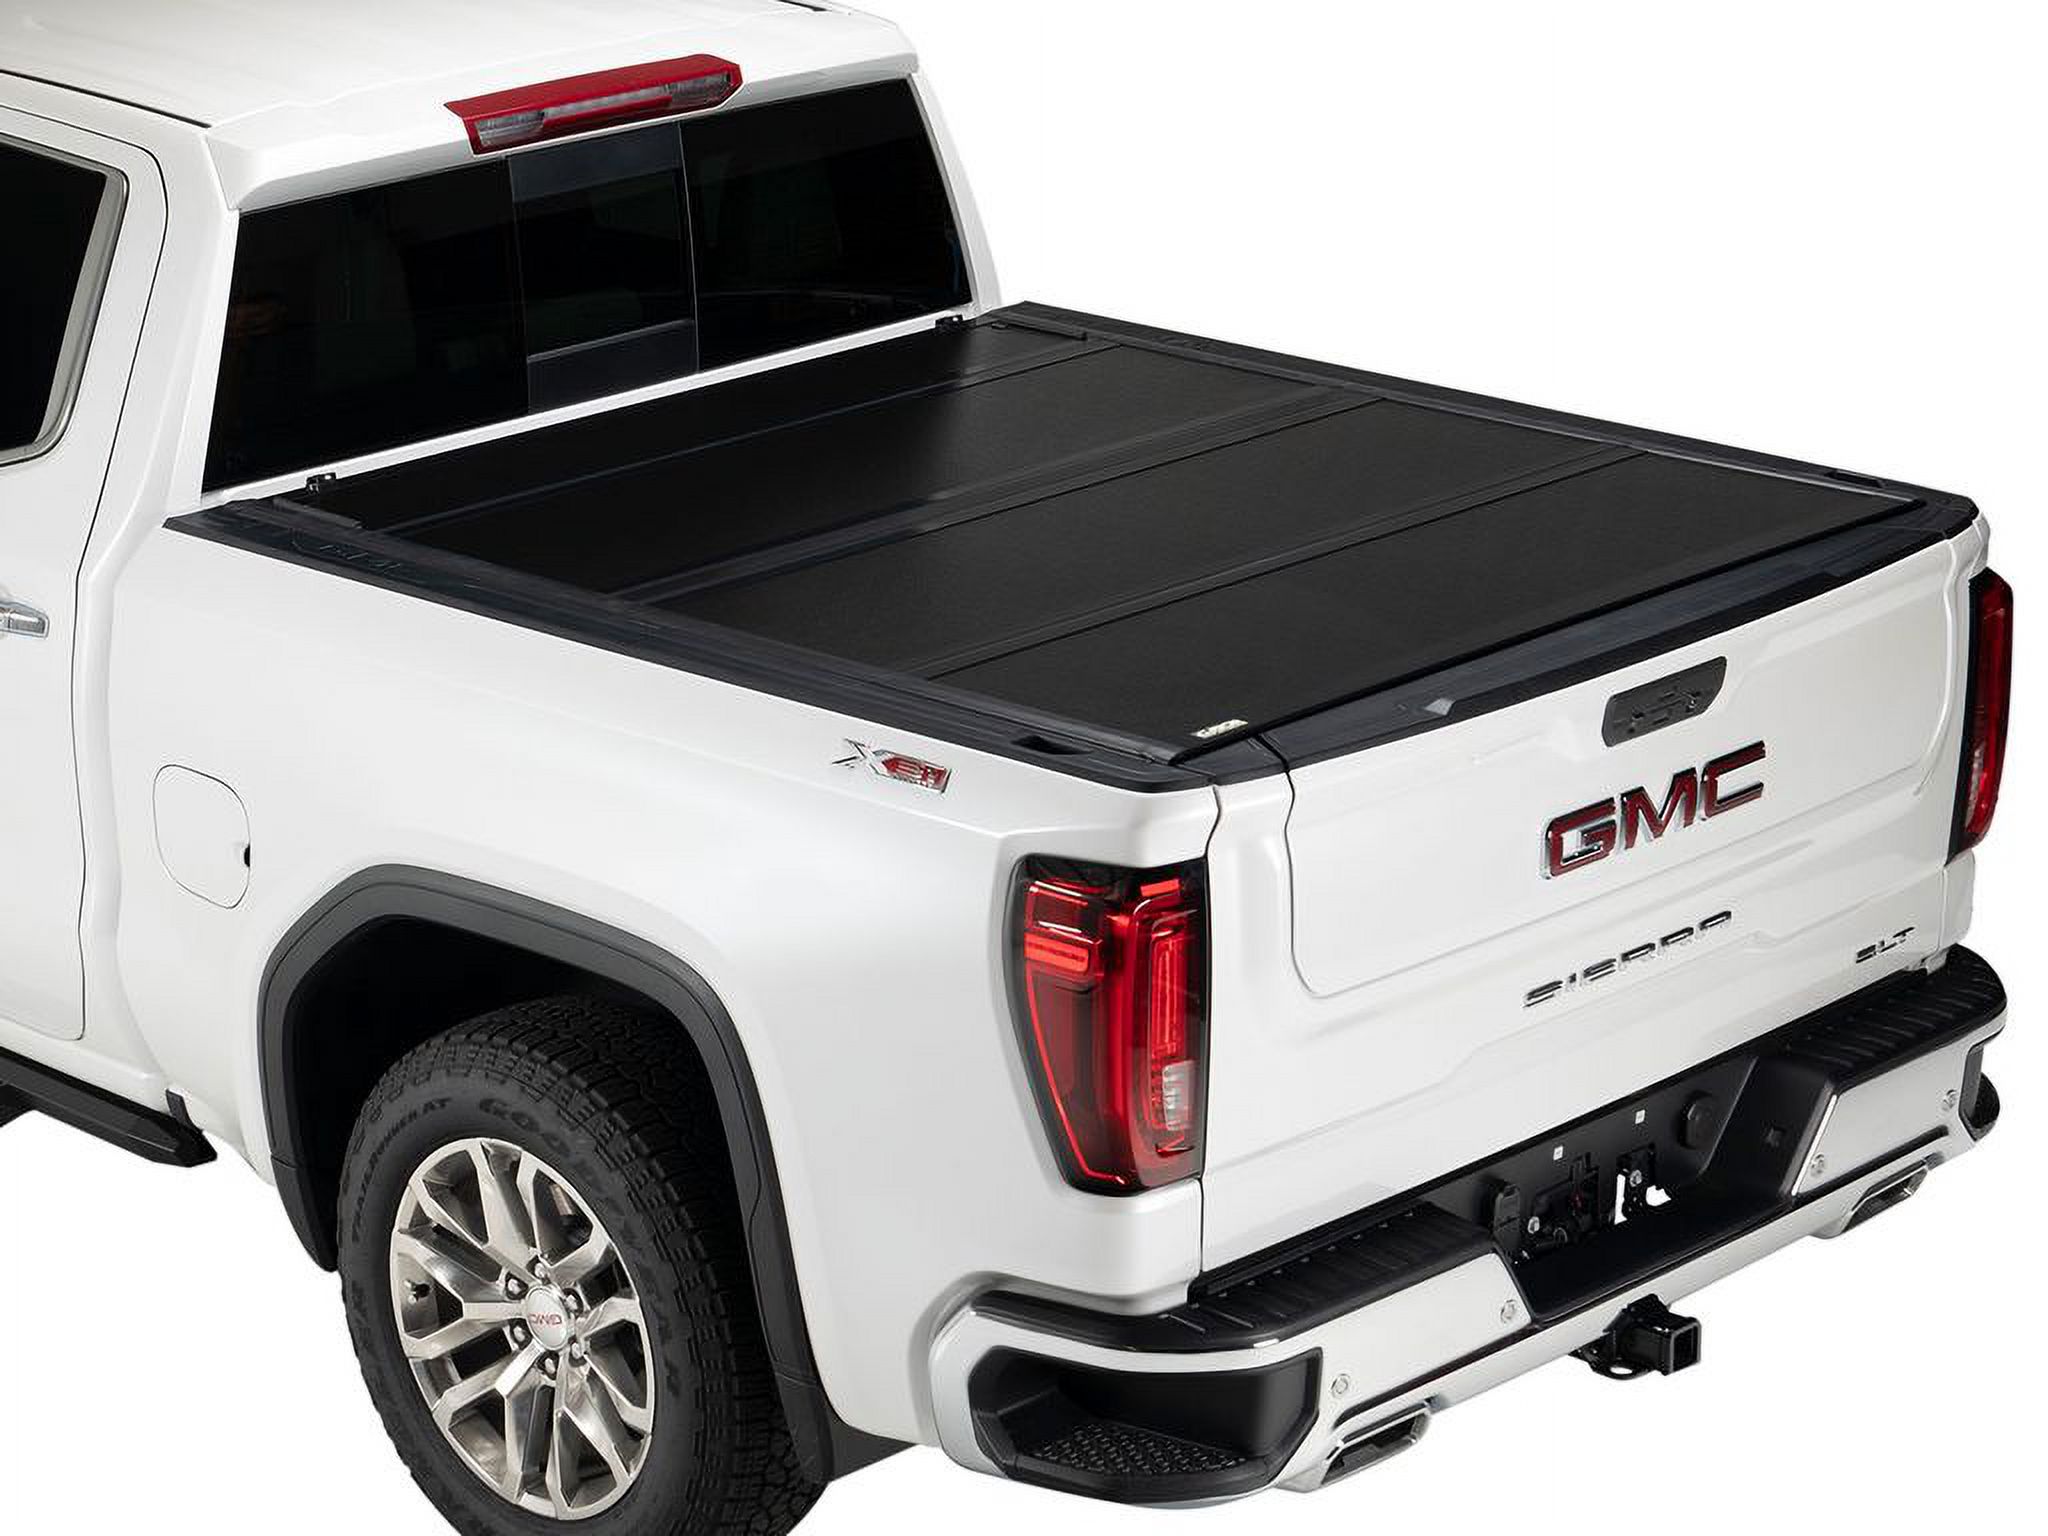 Gator by RealTruck FX Hard Folding Truck Bed Tonneau Cover | 8828409 | Compatible with 2007-2021 Toyota Tundra w/o Track System, Will Not Work With Trail Edition Models 5' 1" Bed (60.5") - image 2 of 9